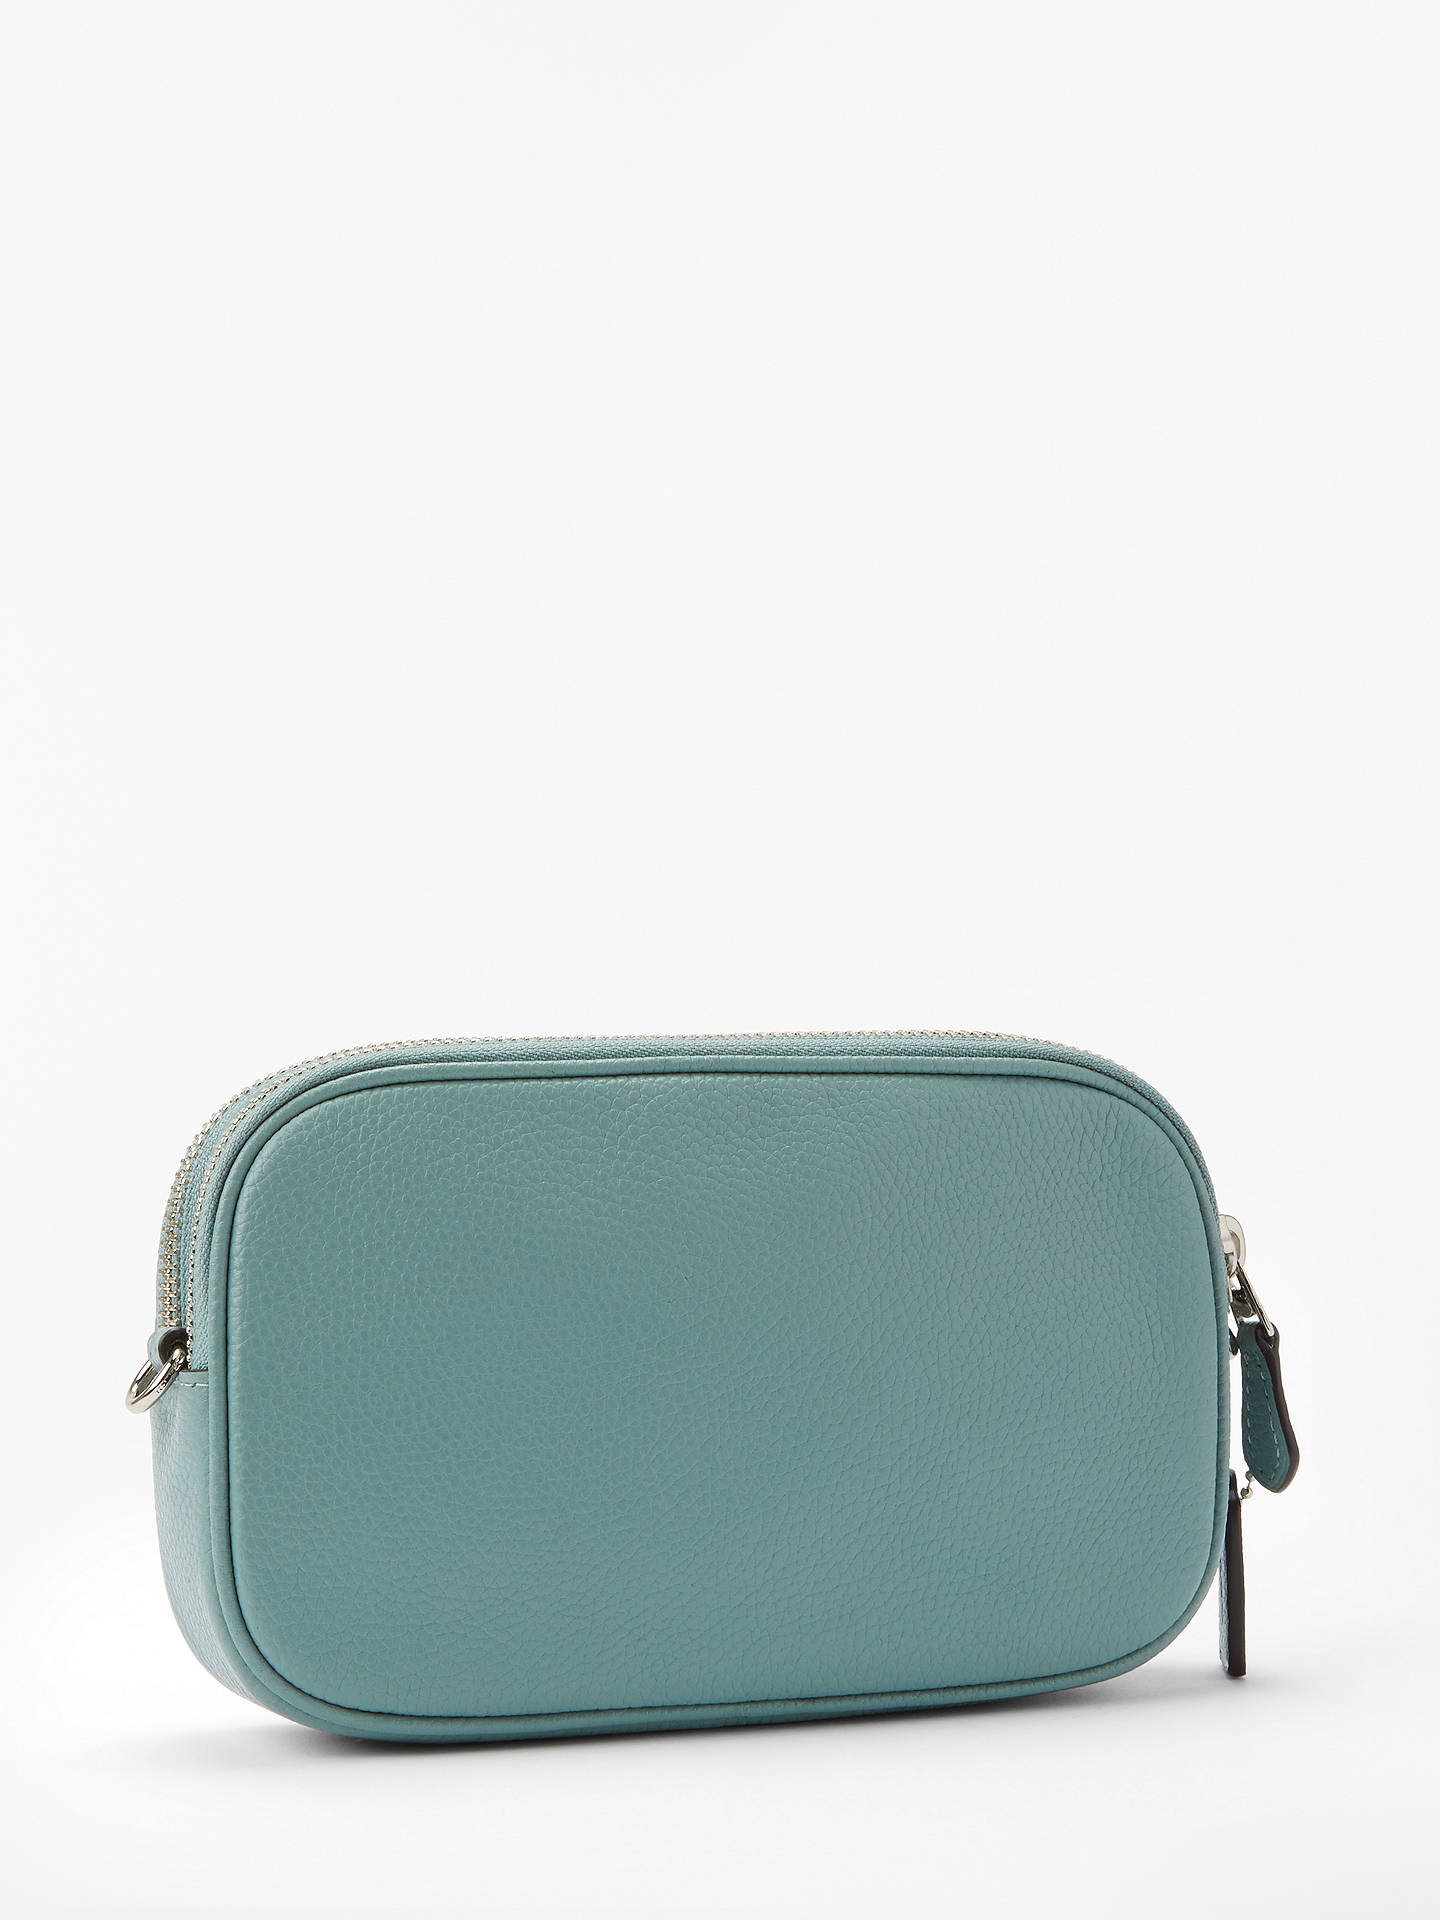 Coach Pebble Leather Cross Body Clutch Bag, Sage at John Lewis & Partners